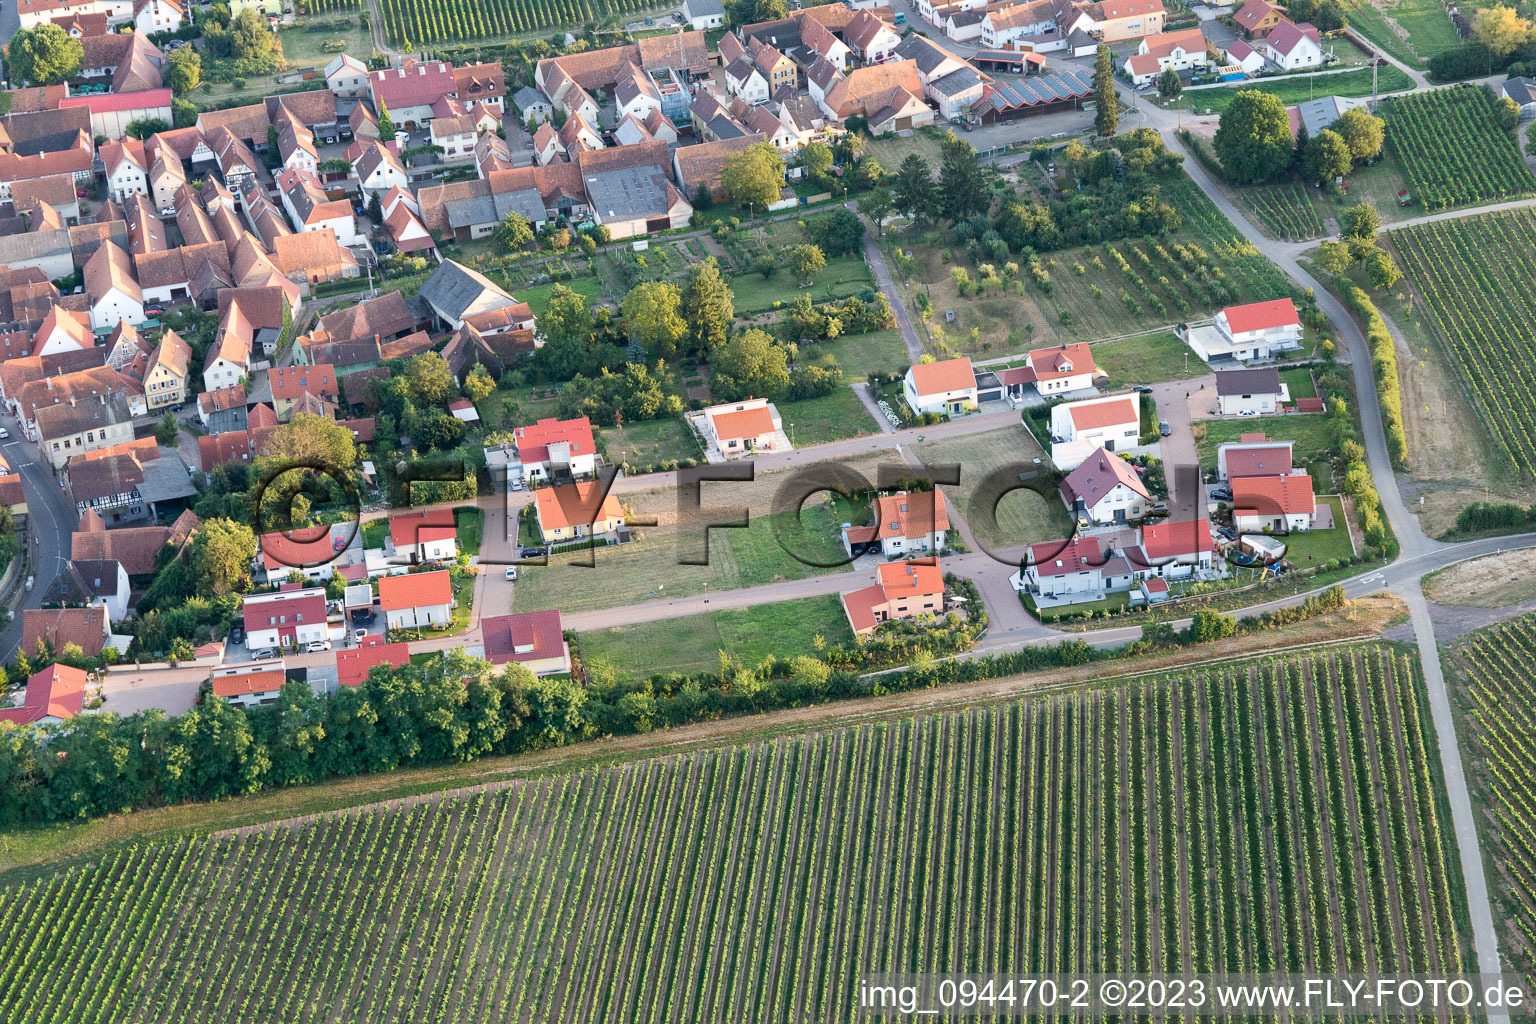 Impflingen in the state Rhineland-Palatinate, Germany viewn from the air